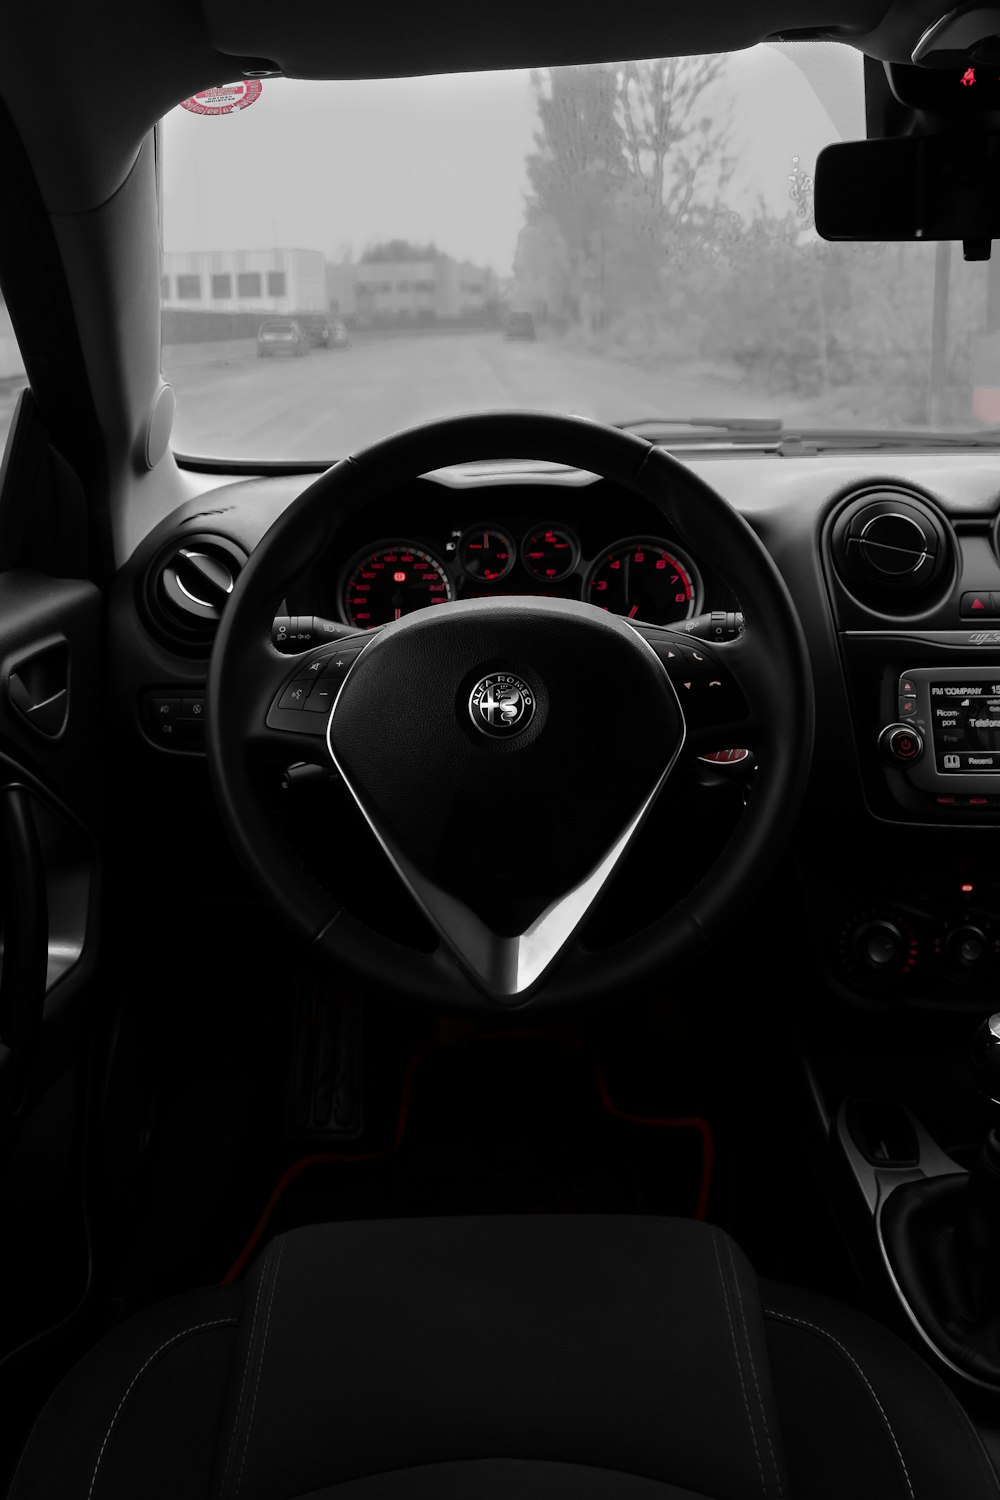 the dashboard of a car with a steering wheel and dashboard lights